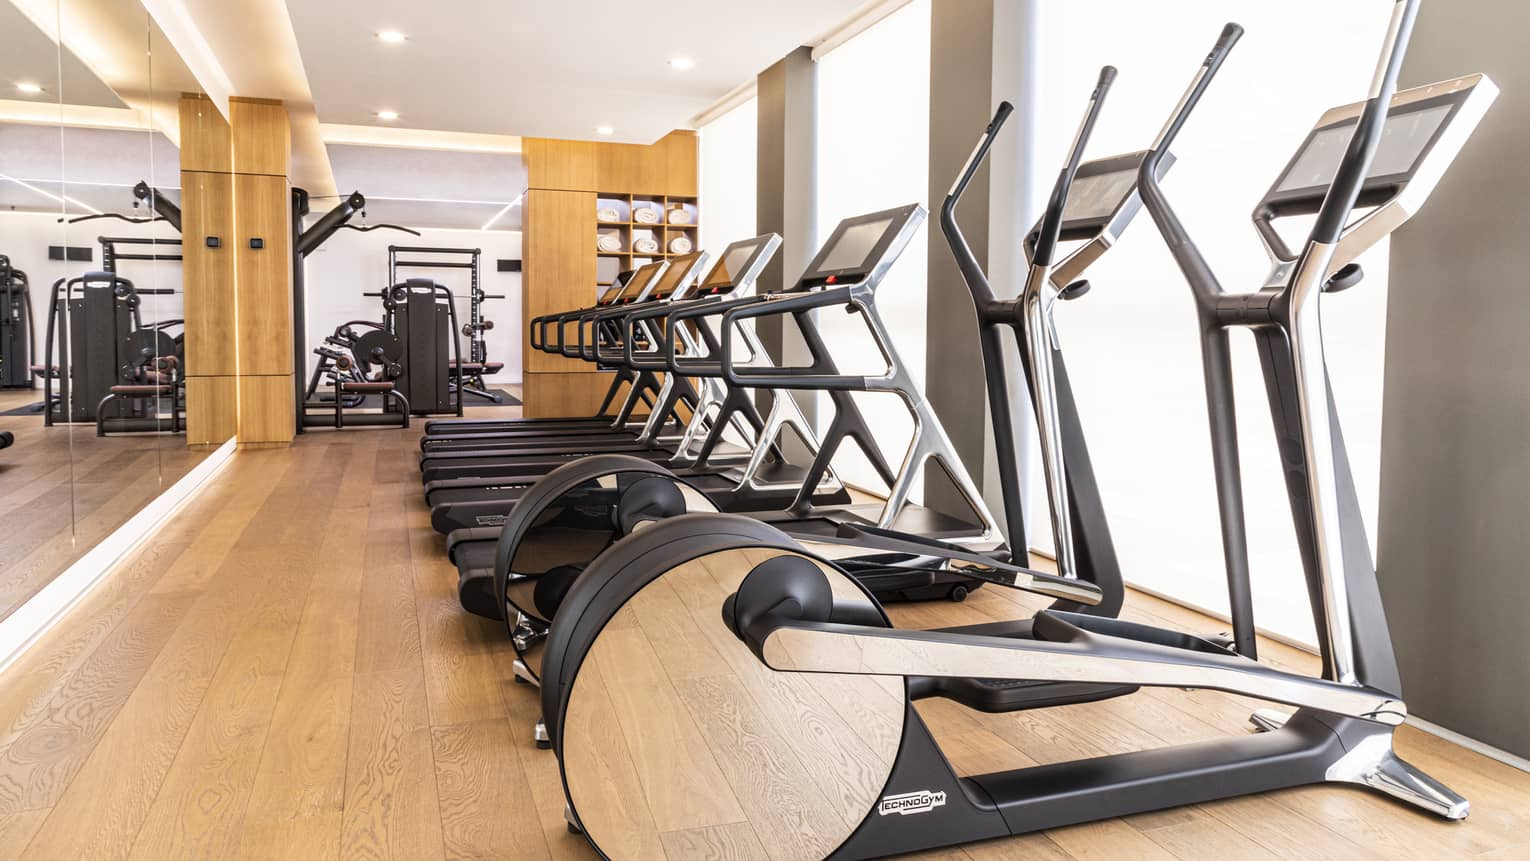 Indoor gym with a row of treadmills and elliptical machines facing windows